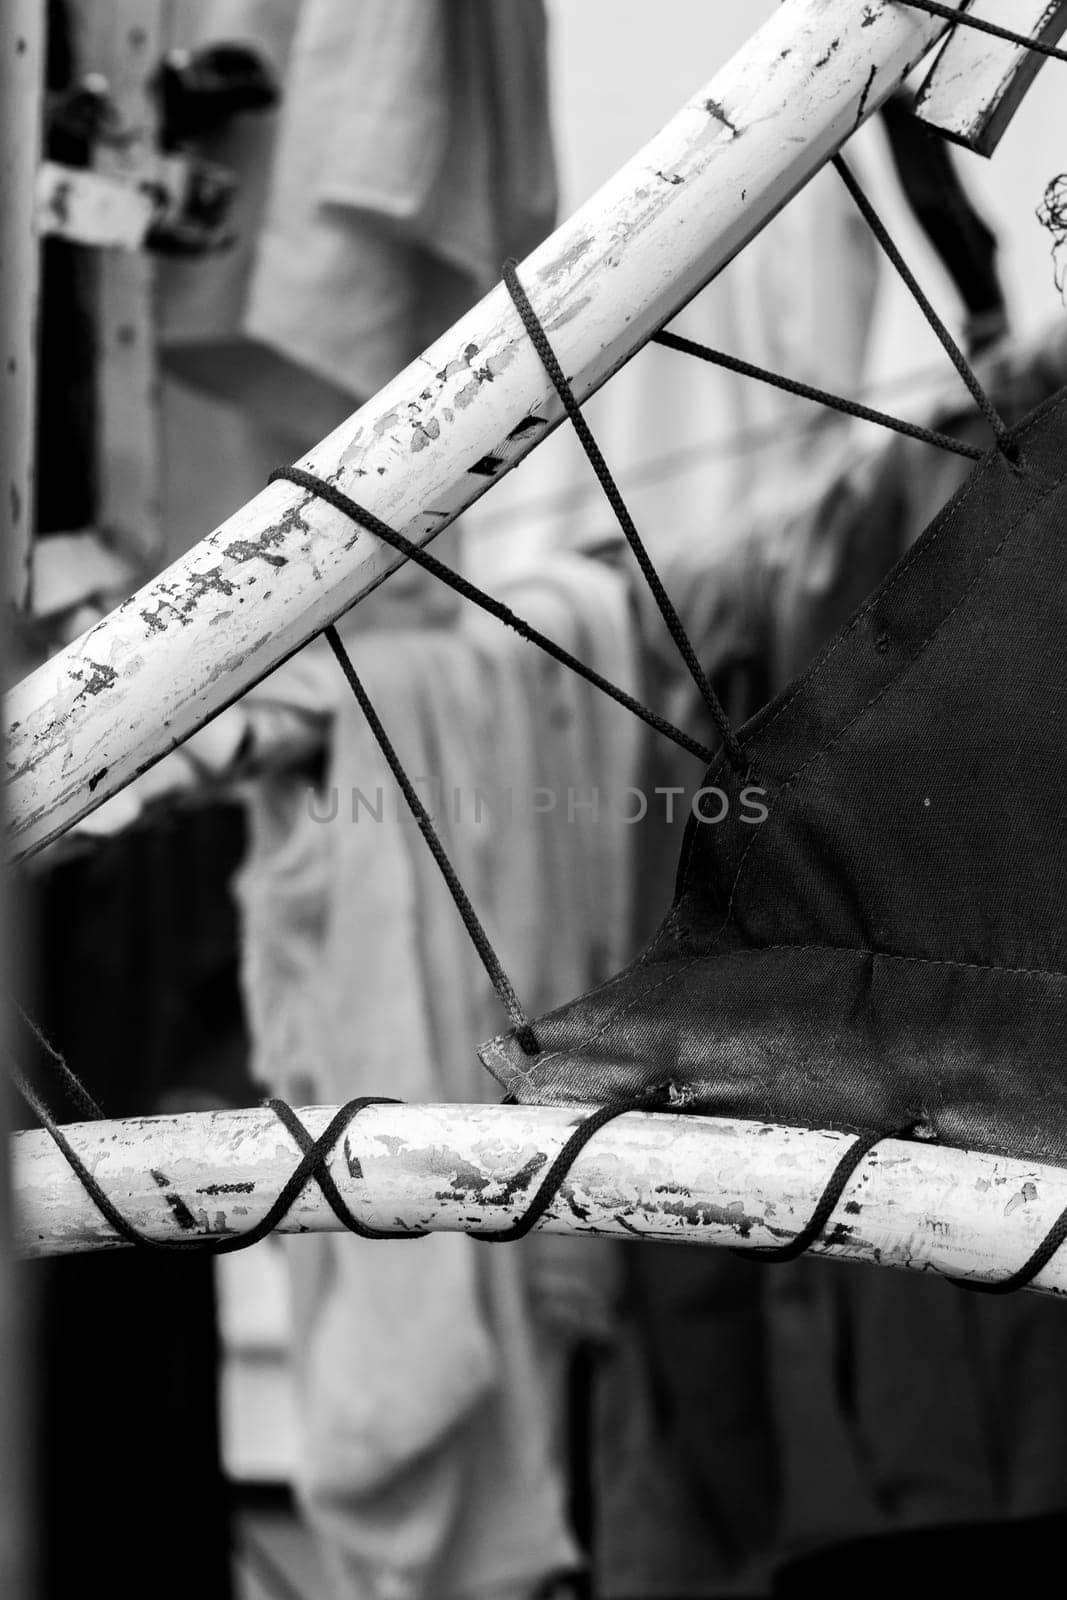 Abstract background of a thread stretched between curved tubes. Black and white photo.